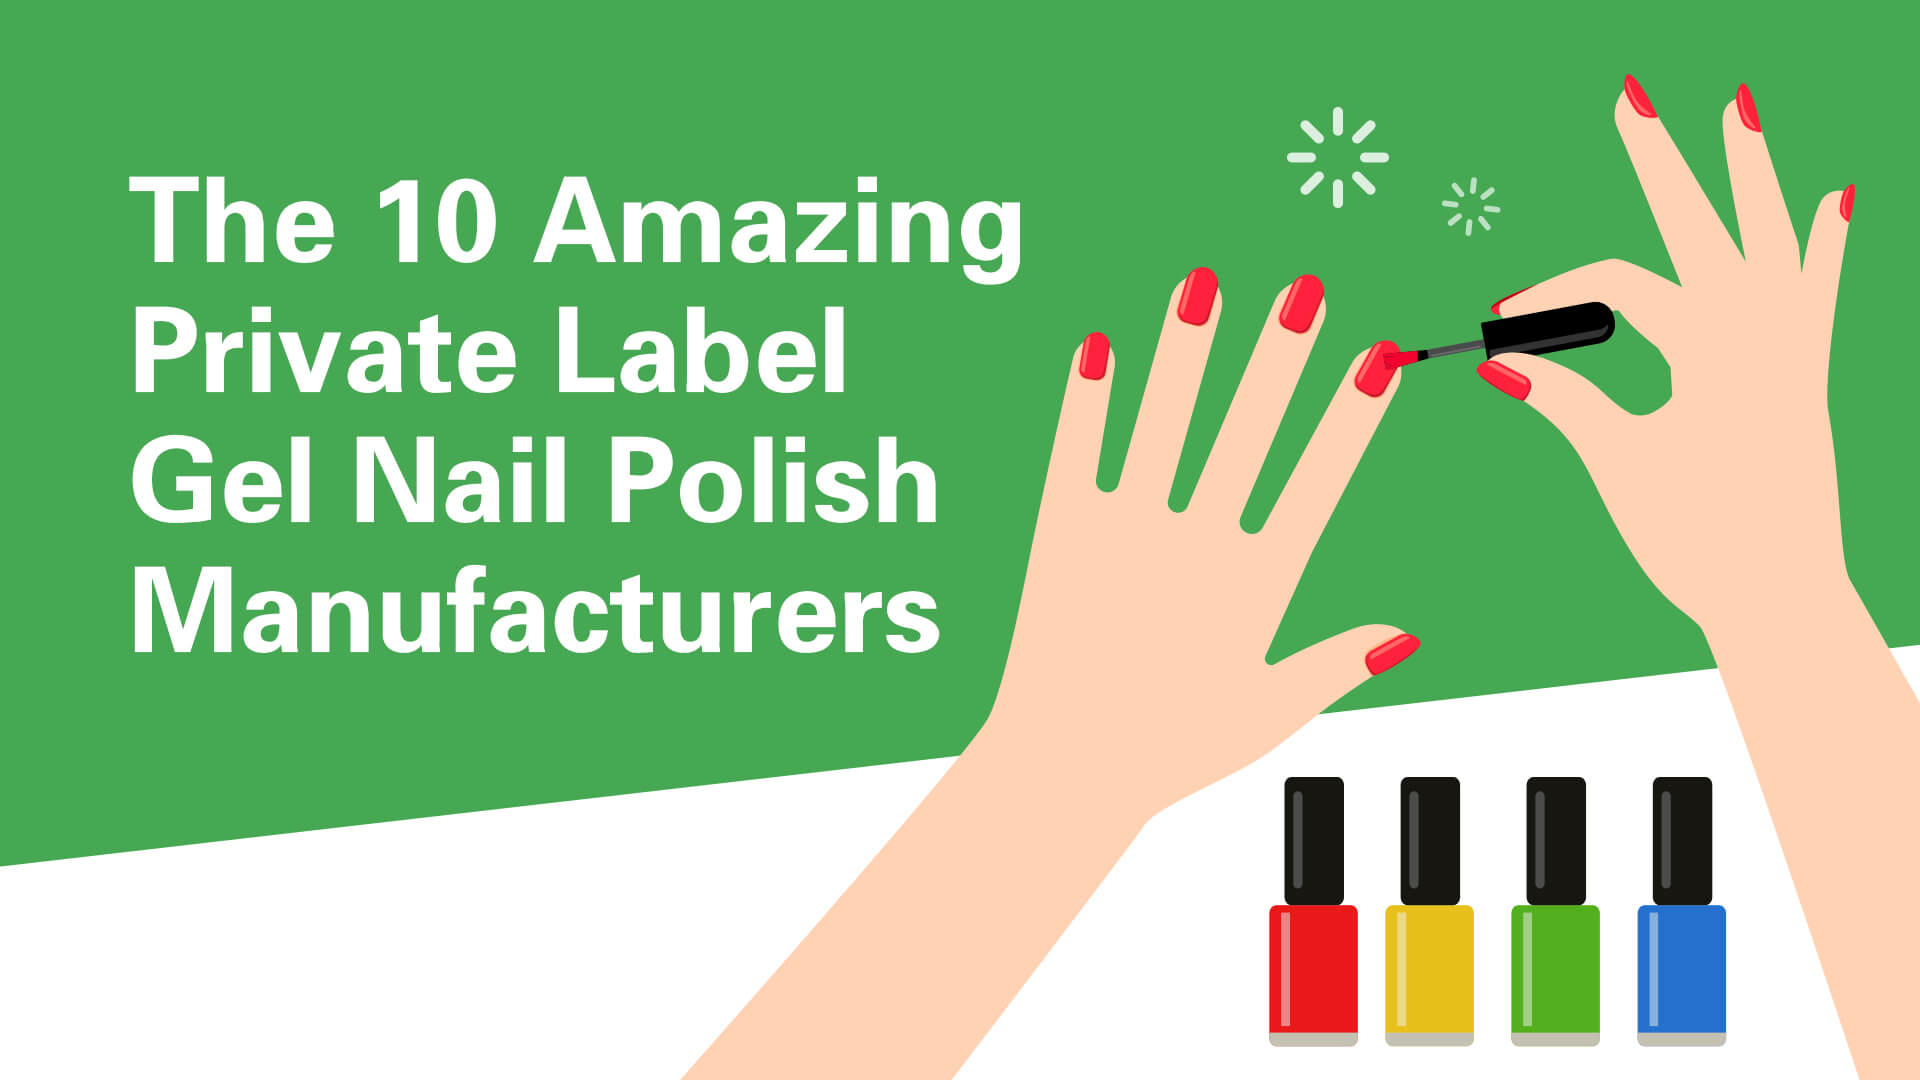 The top 10 Private Label Gel Nail Polish Manufacturers.